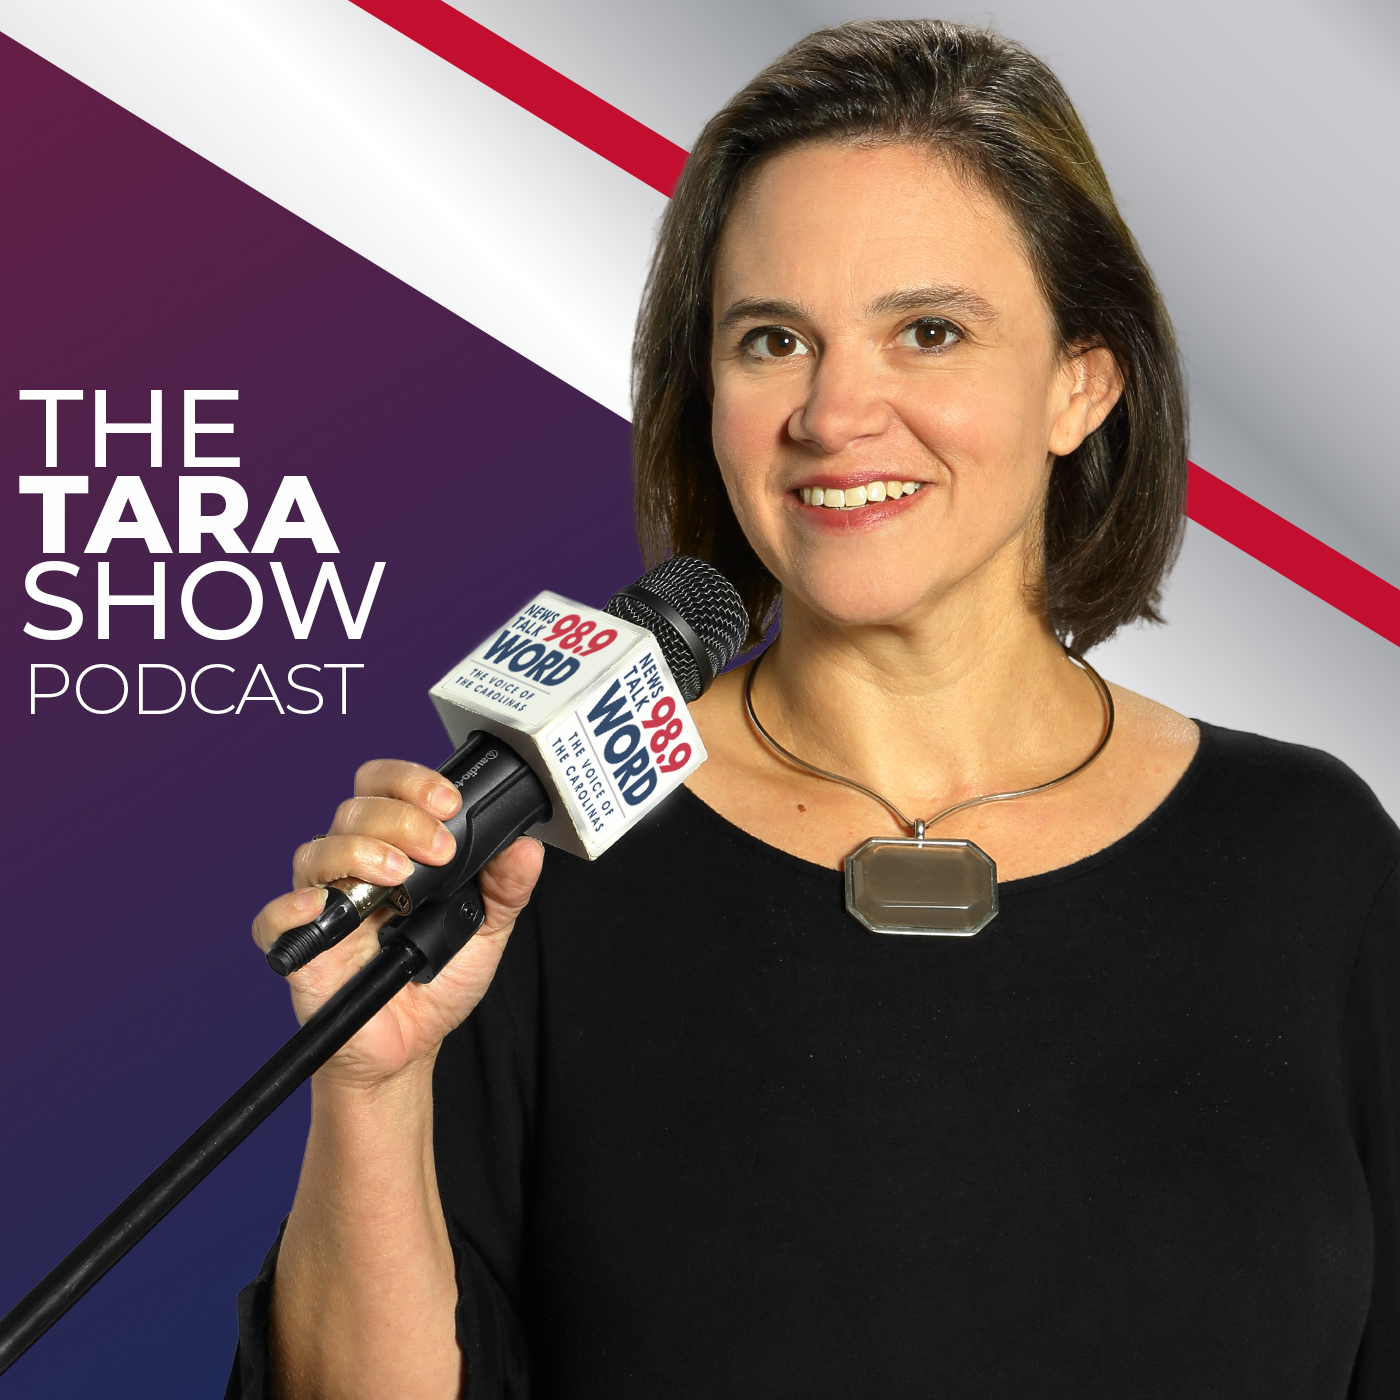 Hour 2: The Tara Show -”The Economic Future of our Country” “The Lesson in the SC District Race” “College Debt with Special Guest Attorney General Alan Wilson” “Sonic Booms and Jet Testing”